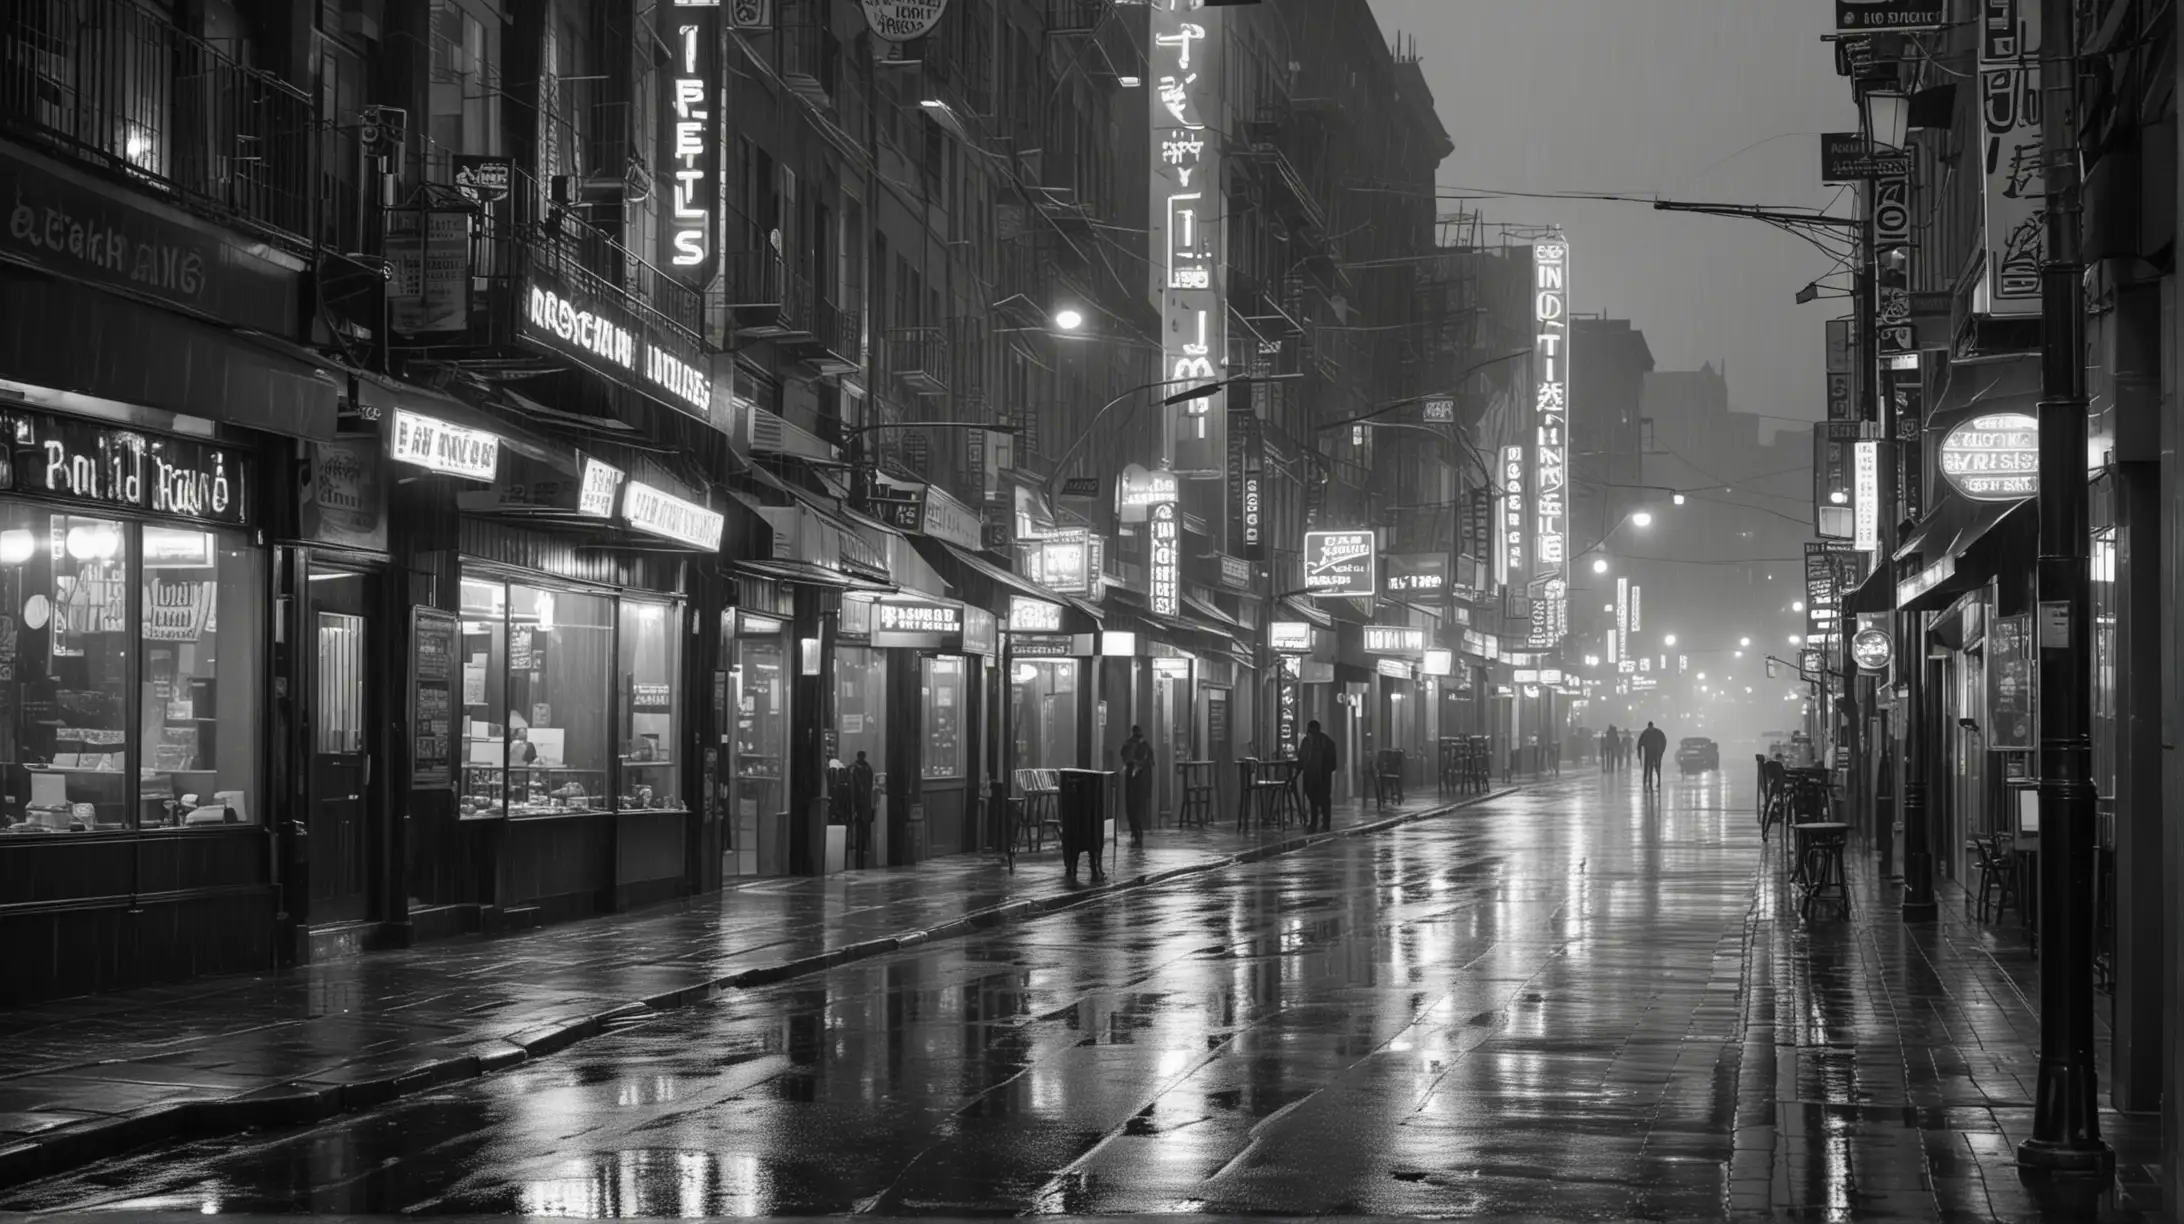 Monochrome image of city street during a light rainfall, with neon signs advertising all night restaurants, hotels,